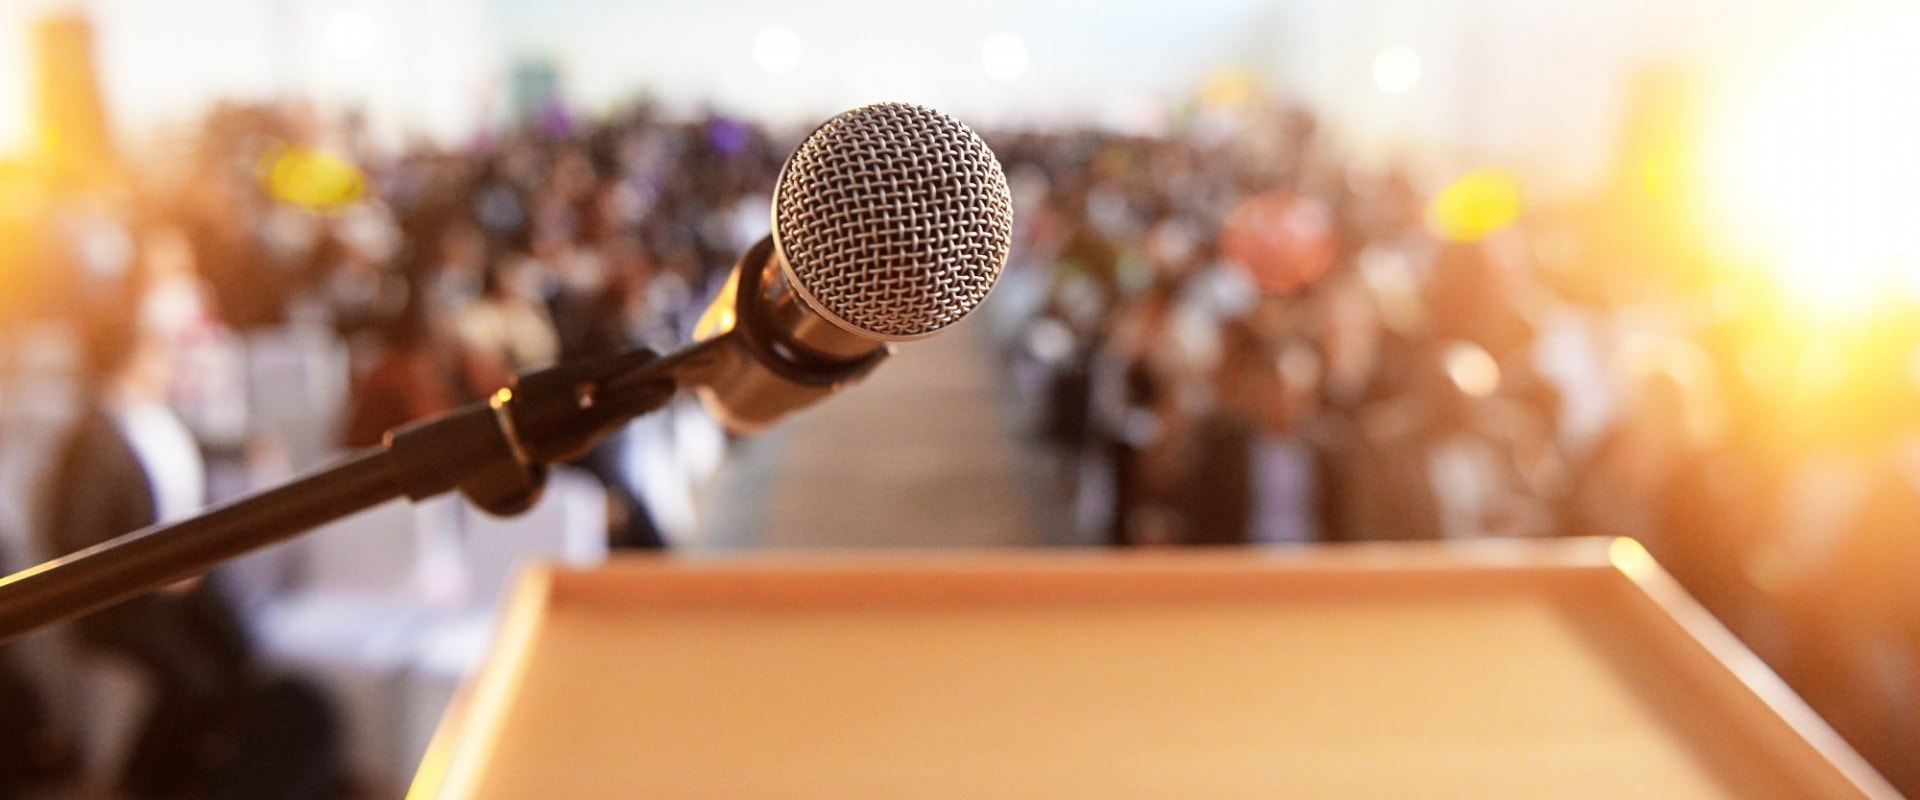 Motivational Speaking: Is It a Viable Career Option?